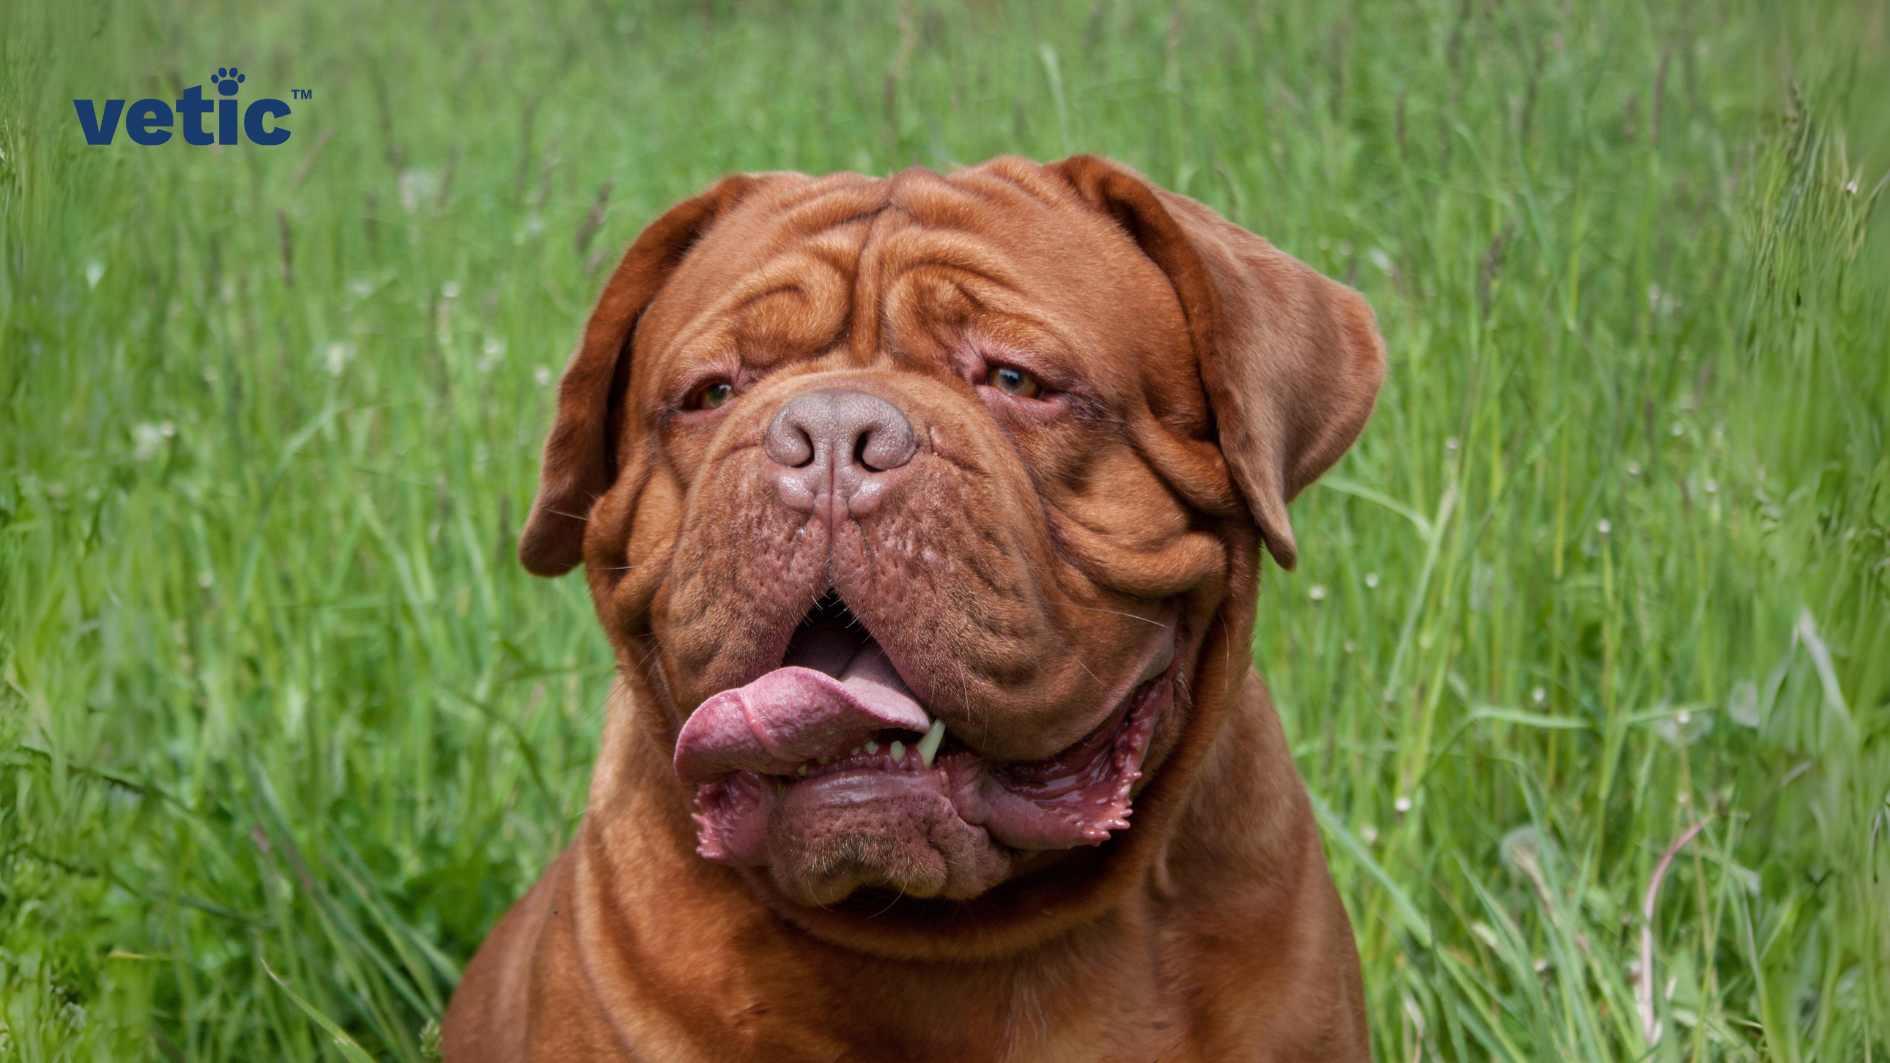 It appears to be a French Mastiff in India, in a grassy field, but the dog’s face is blurred out. The text “vetic” in the top left corner suggests that the image might be related to veterinary medicine or animal care. The dog looks calm and relaxed, as its tongue is sticking out slightly. The image was taken outdoors, as there is greenery in the background.